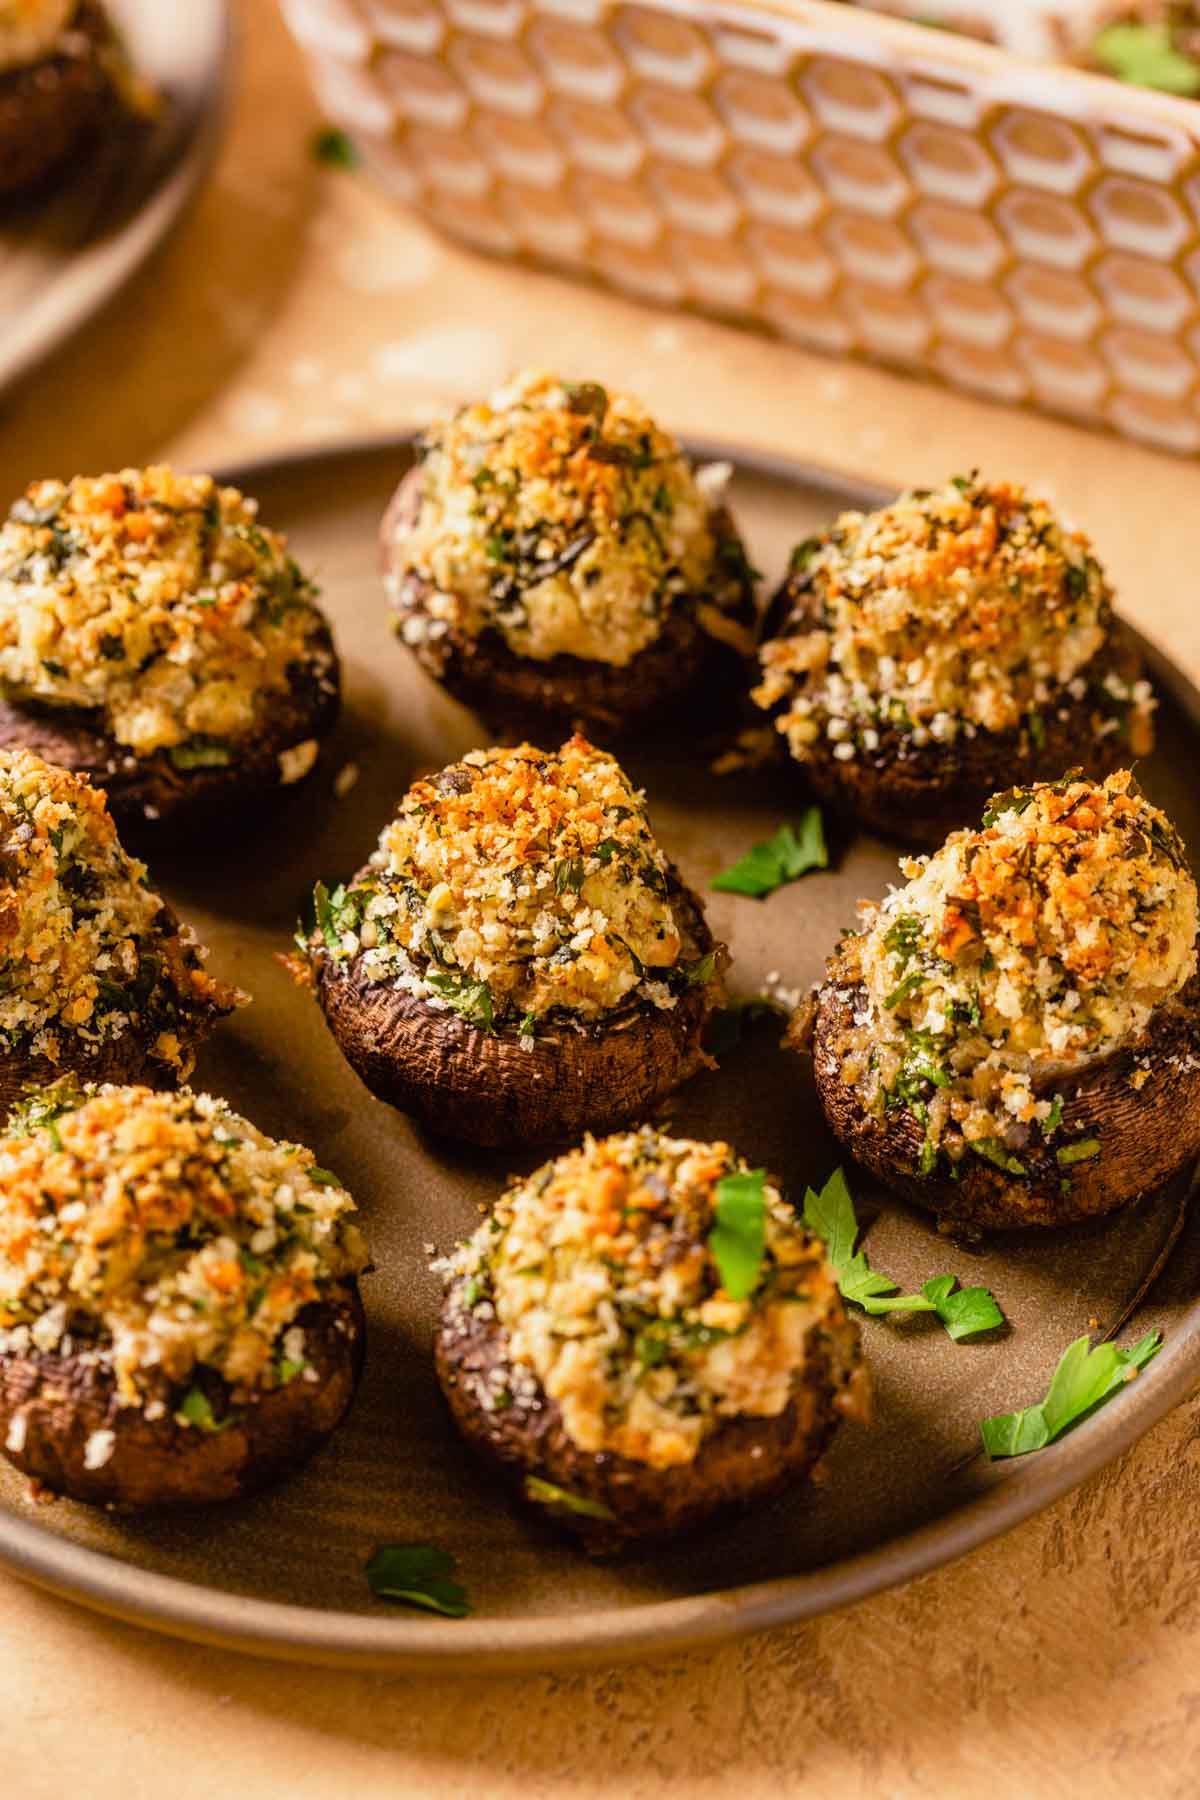 Healthy Stuffed Mushrooms with Spinach and Goat Cheese